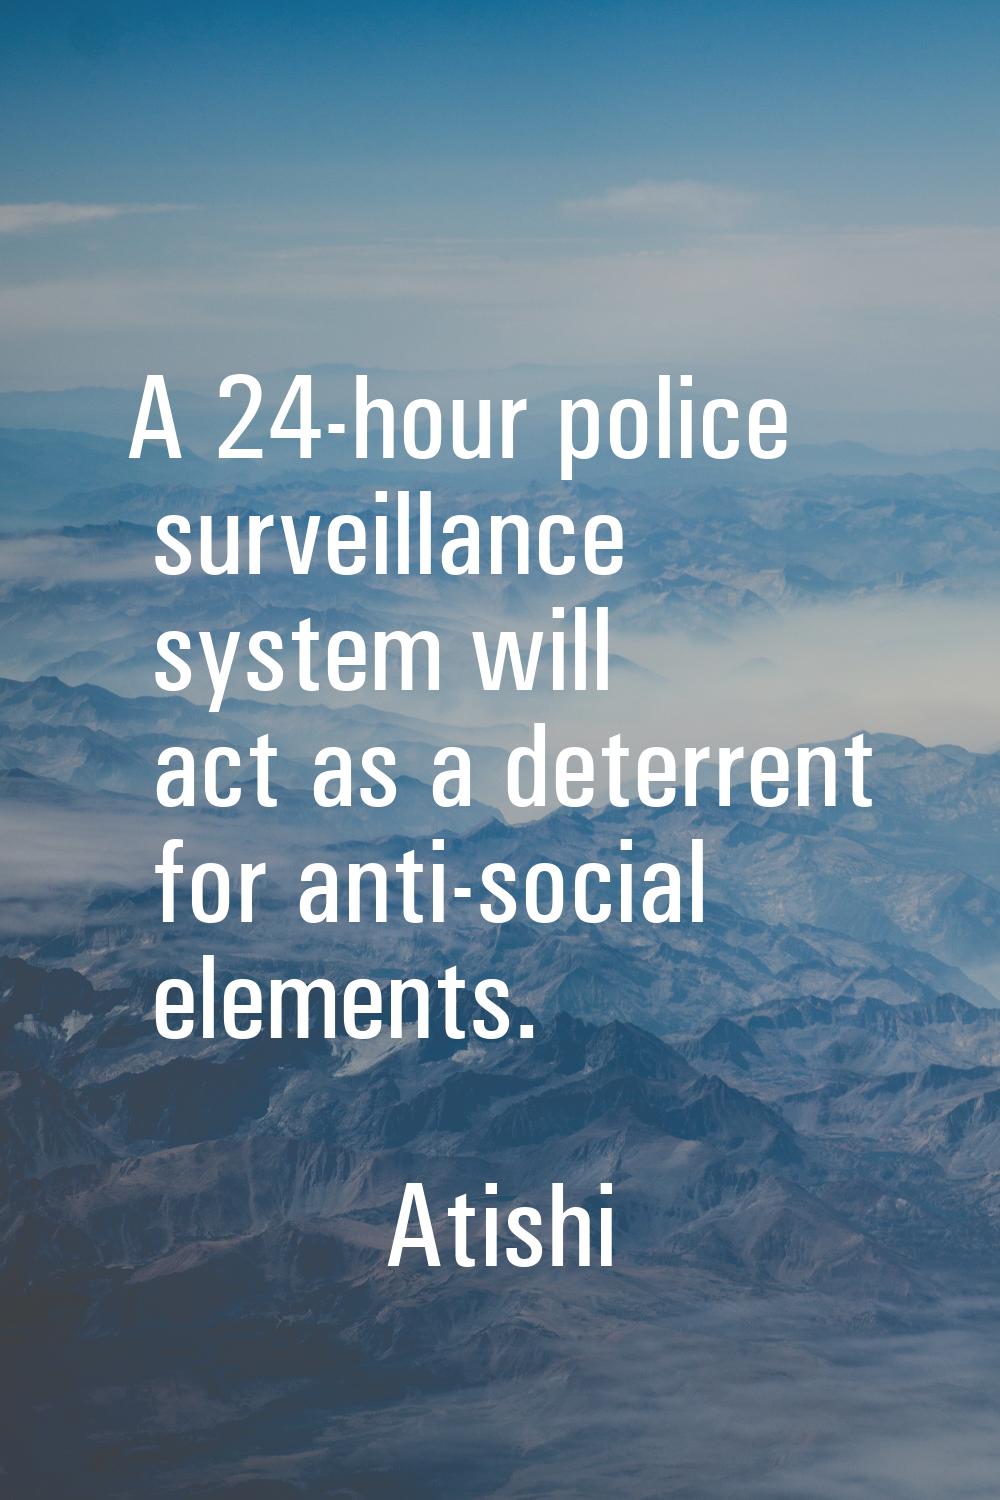 A 24-hour police surveillance system will act as a deterrent for anti-social elements.